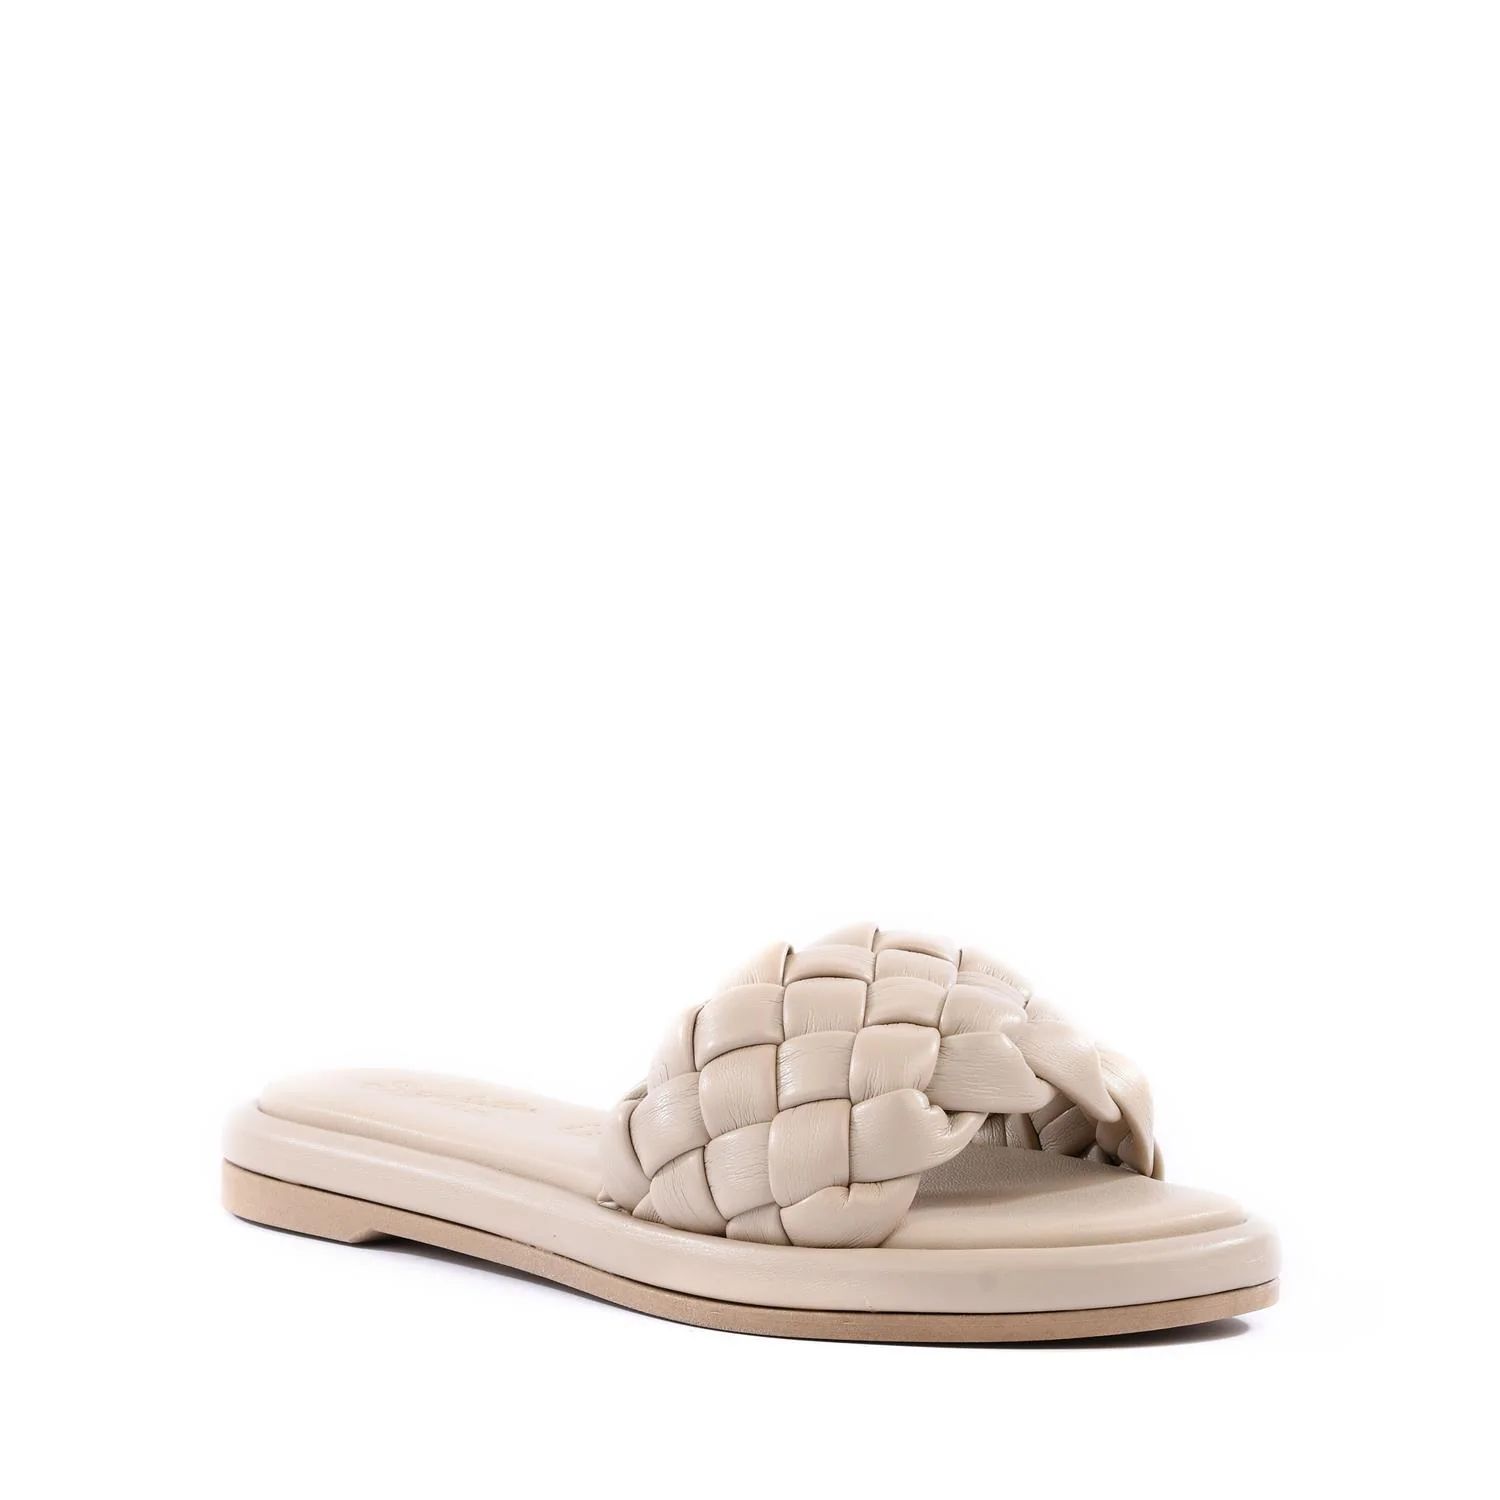 Seychelles Women's Bellissima Sandals in Oatmeal 6 Lord & Taylor | Lord & Taylor